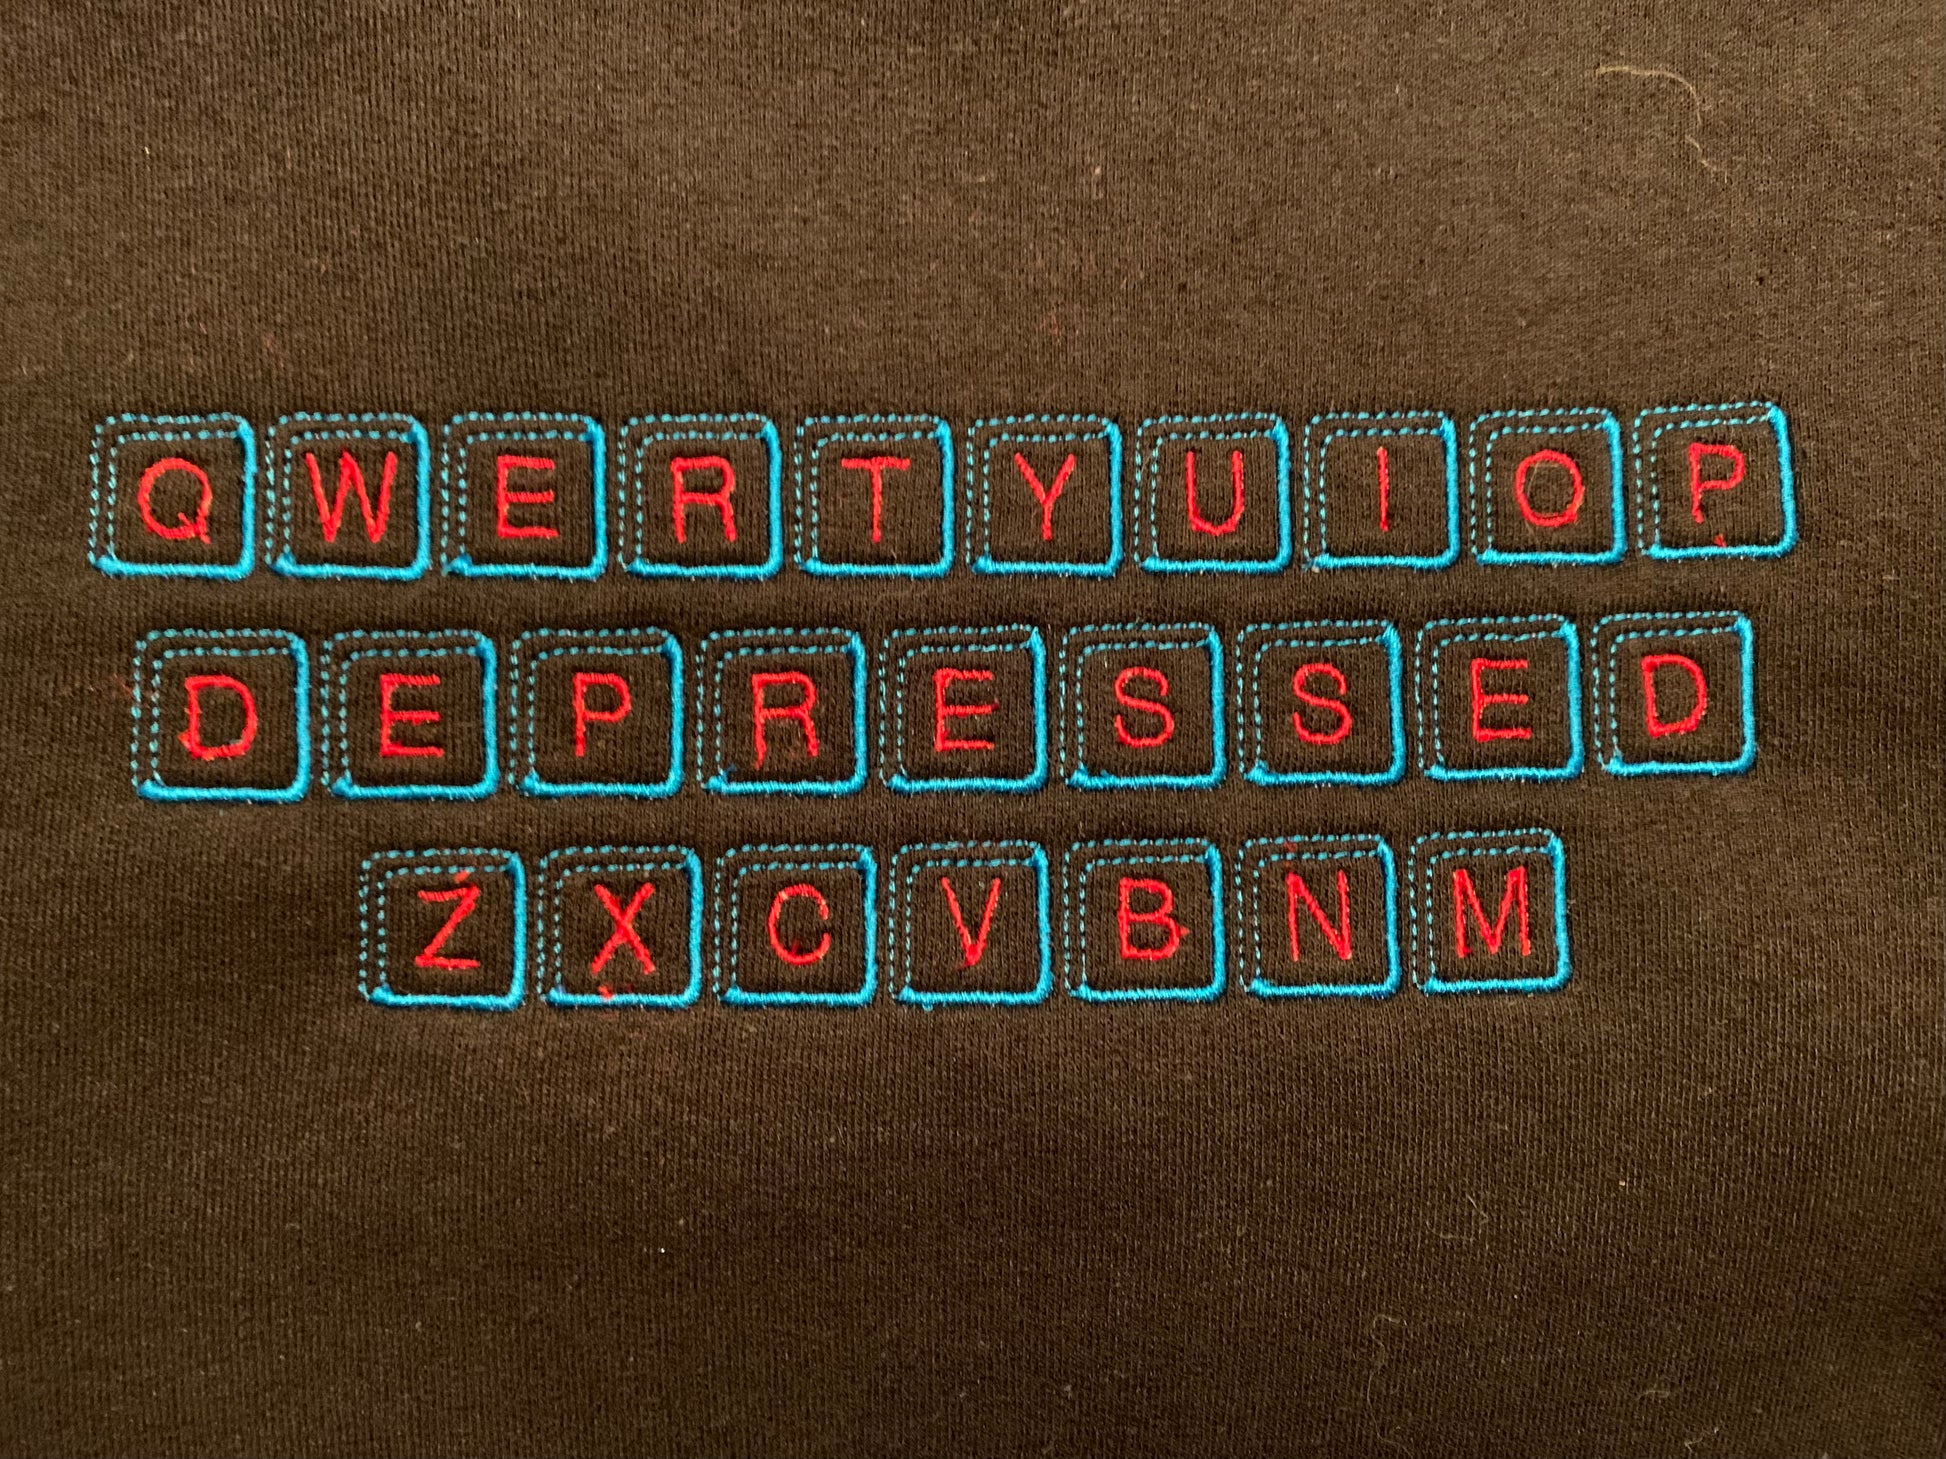 An upclose picture of a black crew neck with an embroidered design inspired by a qwerty keyboard on it. In the design, the middle row of keys are replaced with keys that spell DEPRESSED.  The key caps are embroidered in a light blue thread, with the letters on the caps embroidered in a bright red thread.